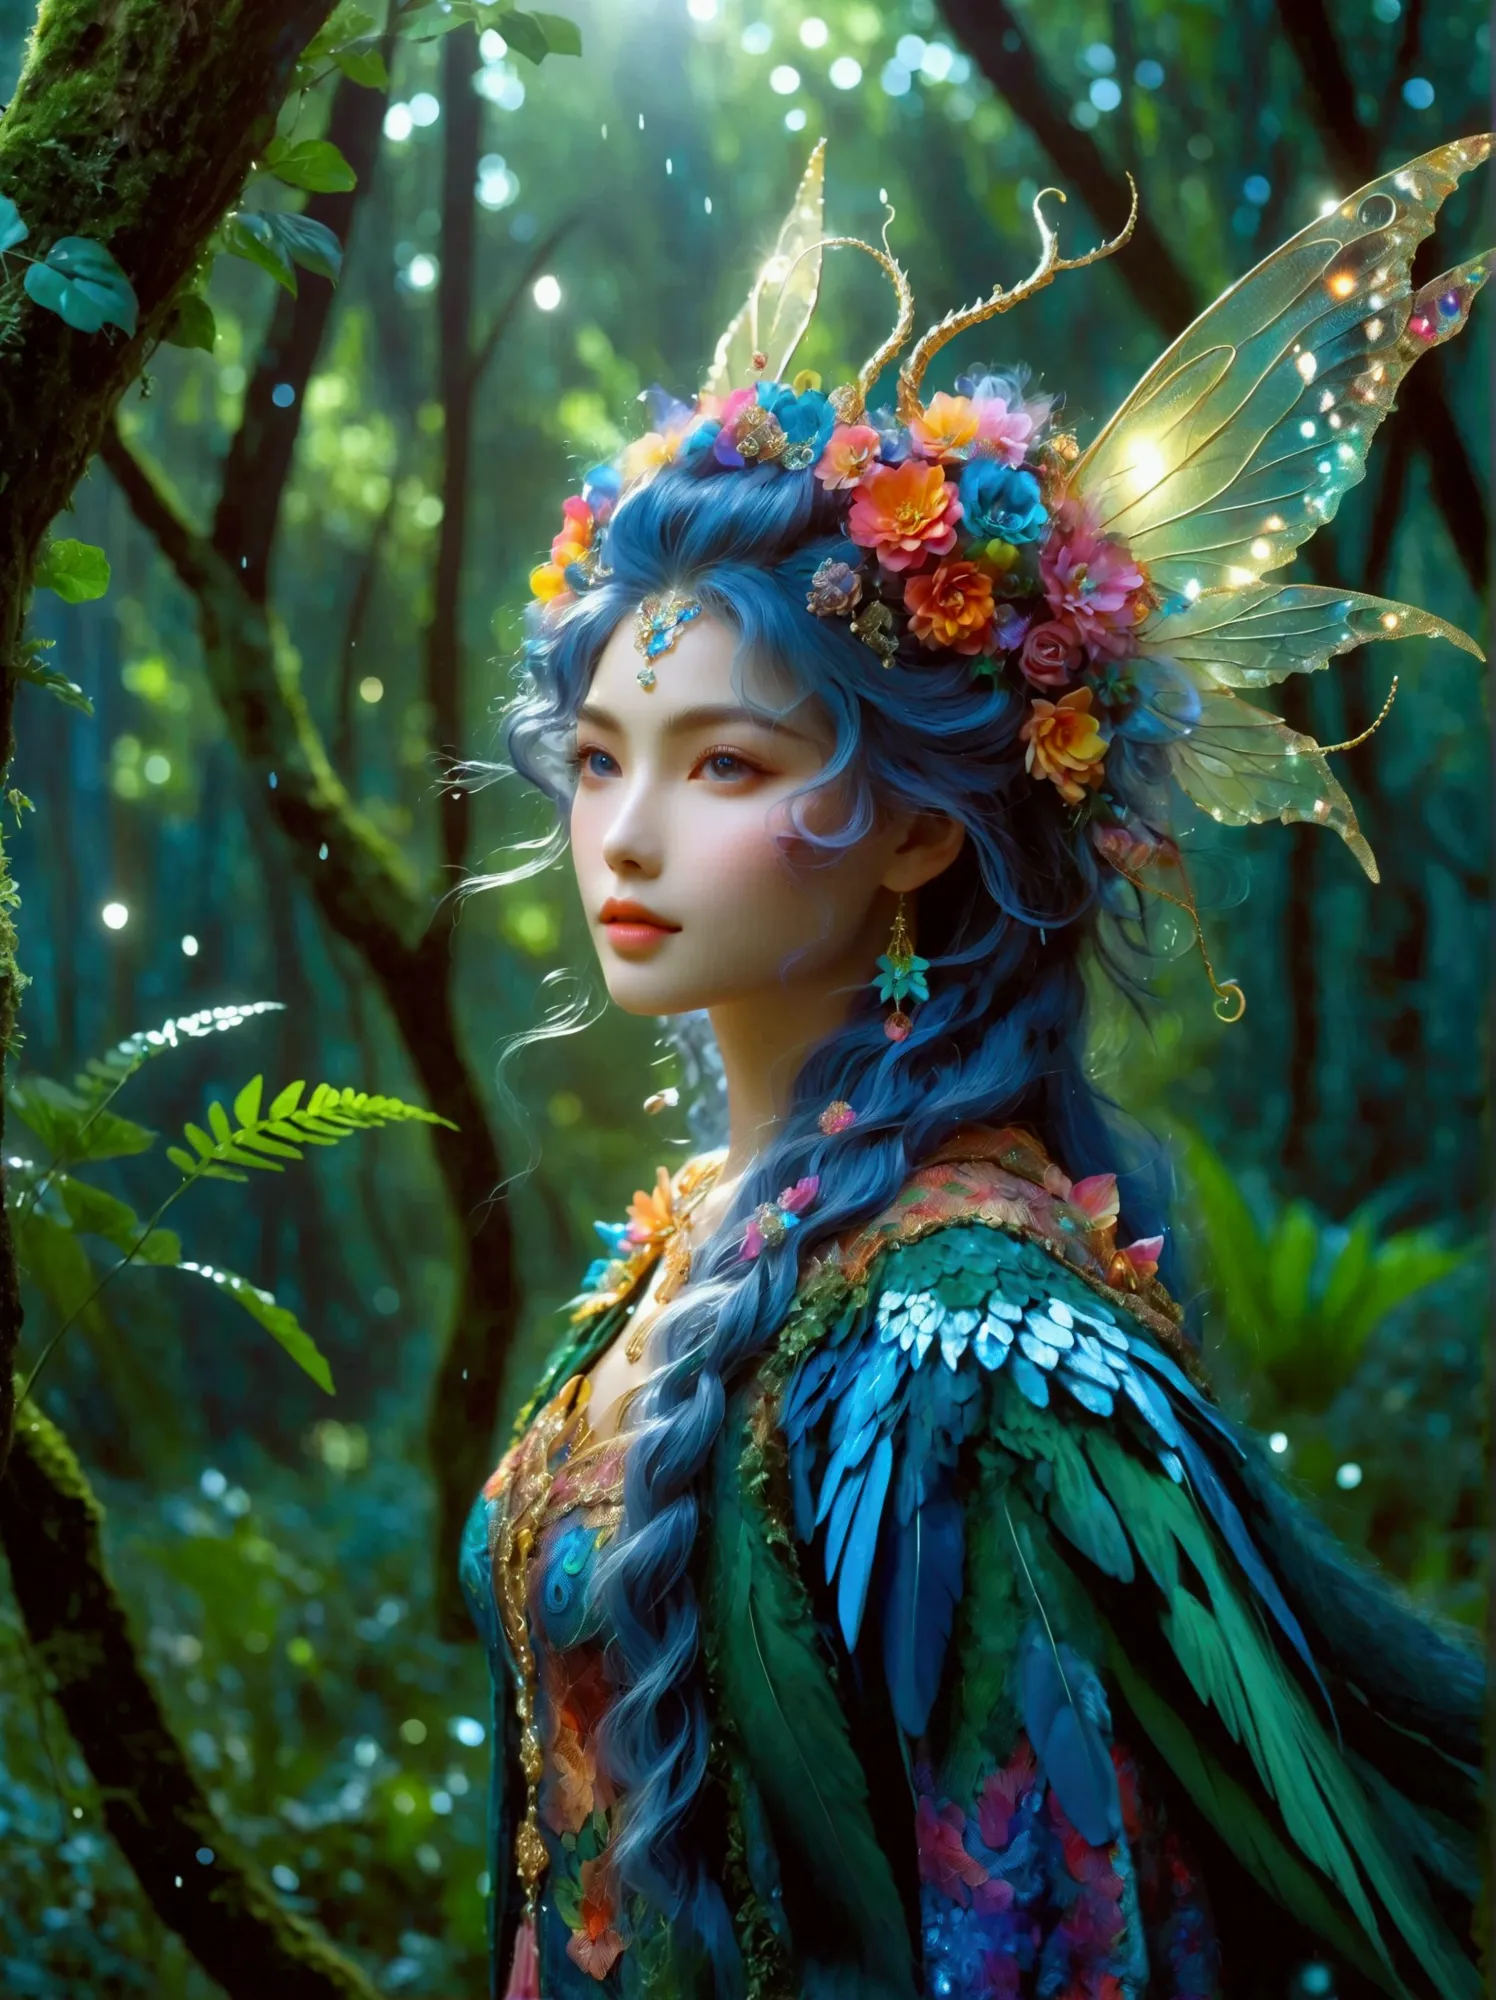 A fantastical creature with feminine qualities stands in a mystical forest. She has voluminous hair, captivating eyes, and adorn...